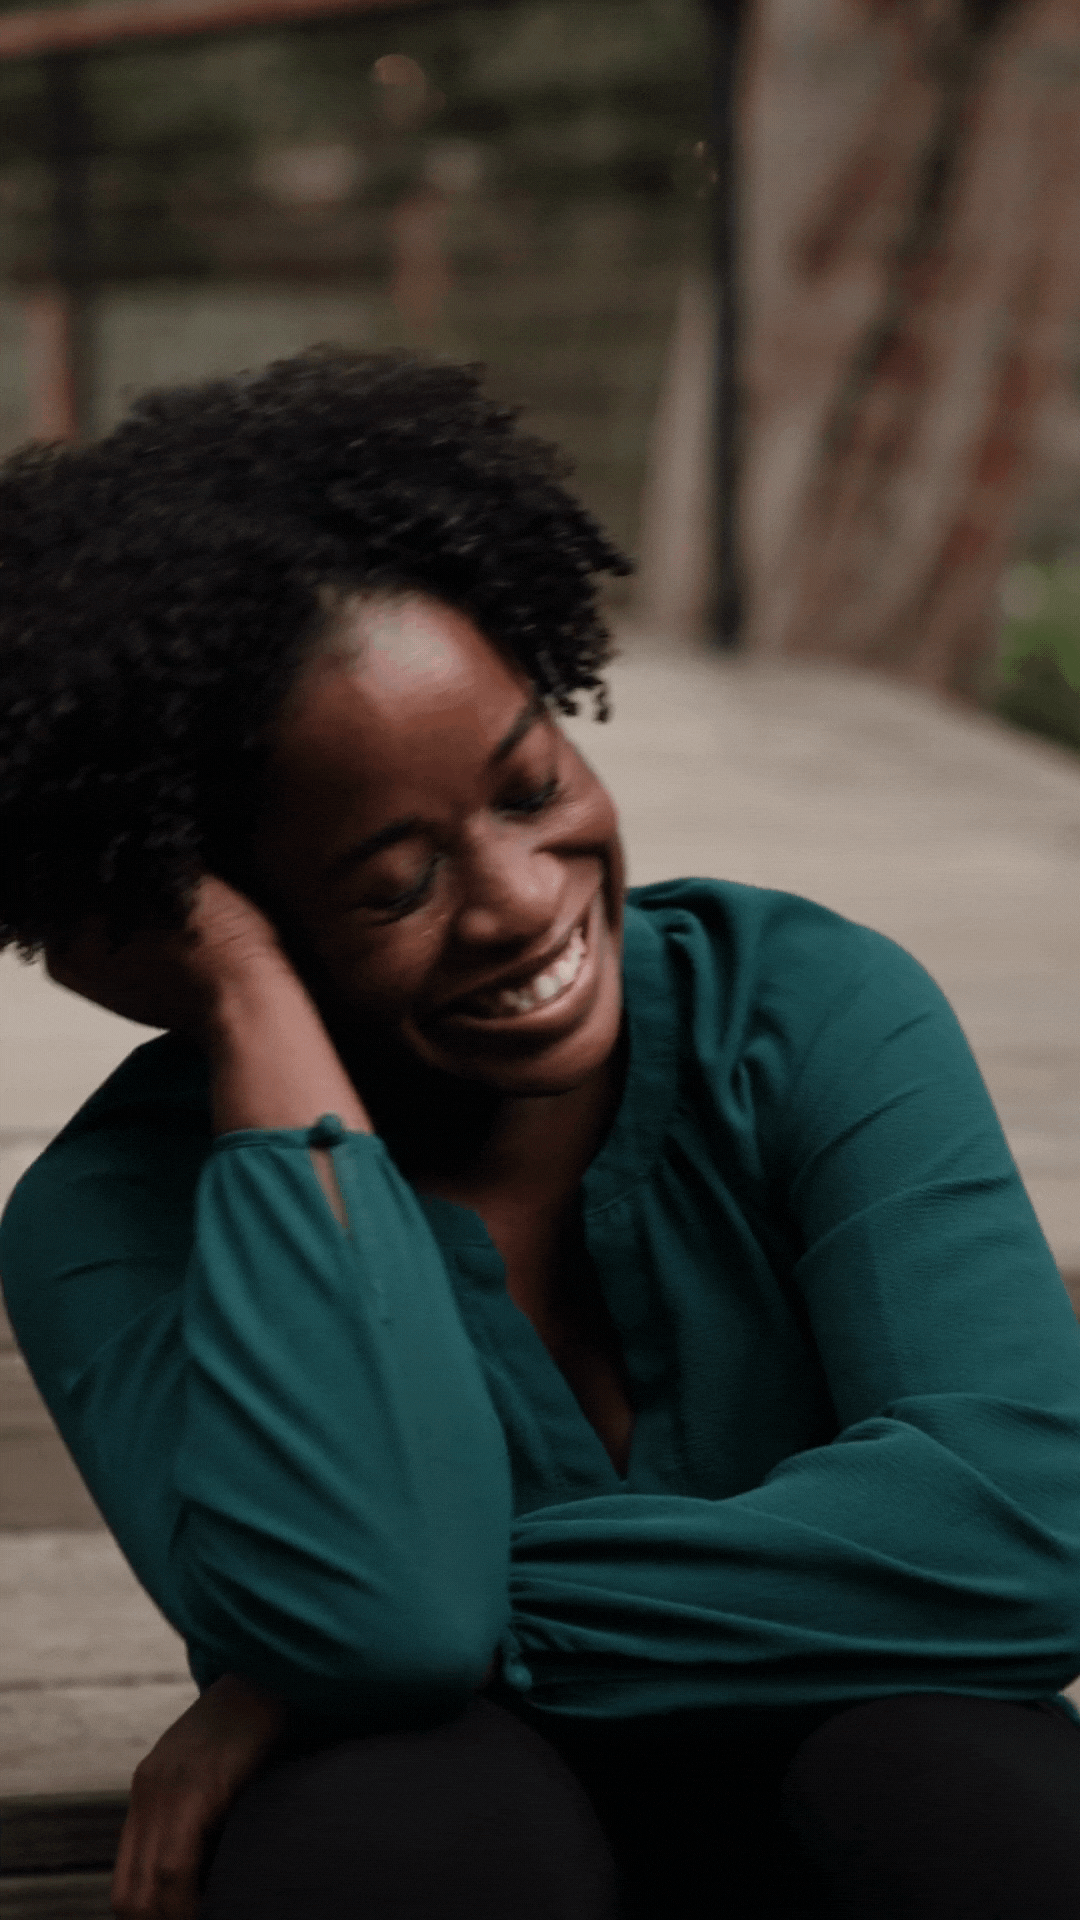 GIF of a woman smiling and laughing.